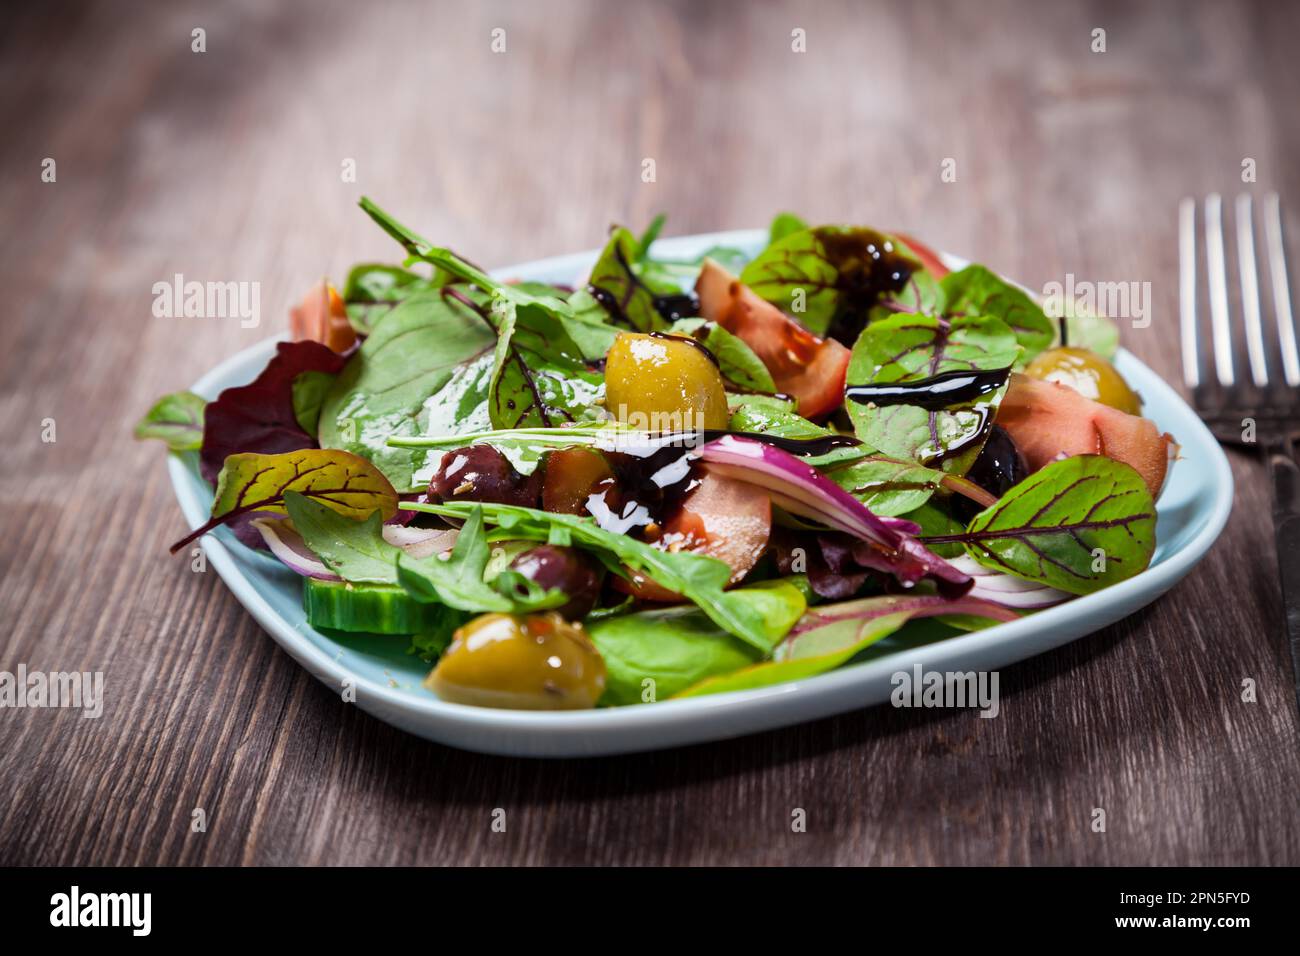 Mixed low calorie salad with olives and fresh avocado Stock Photo